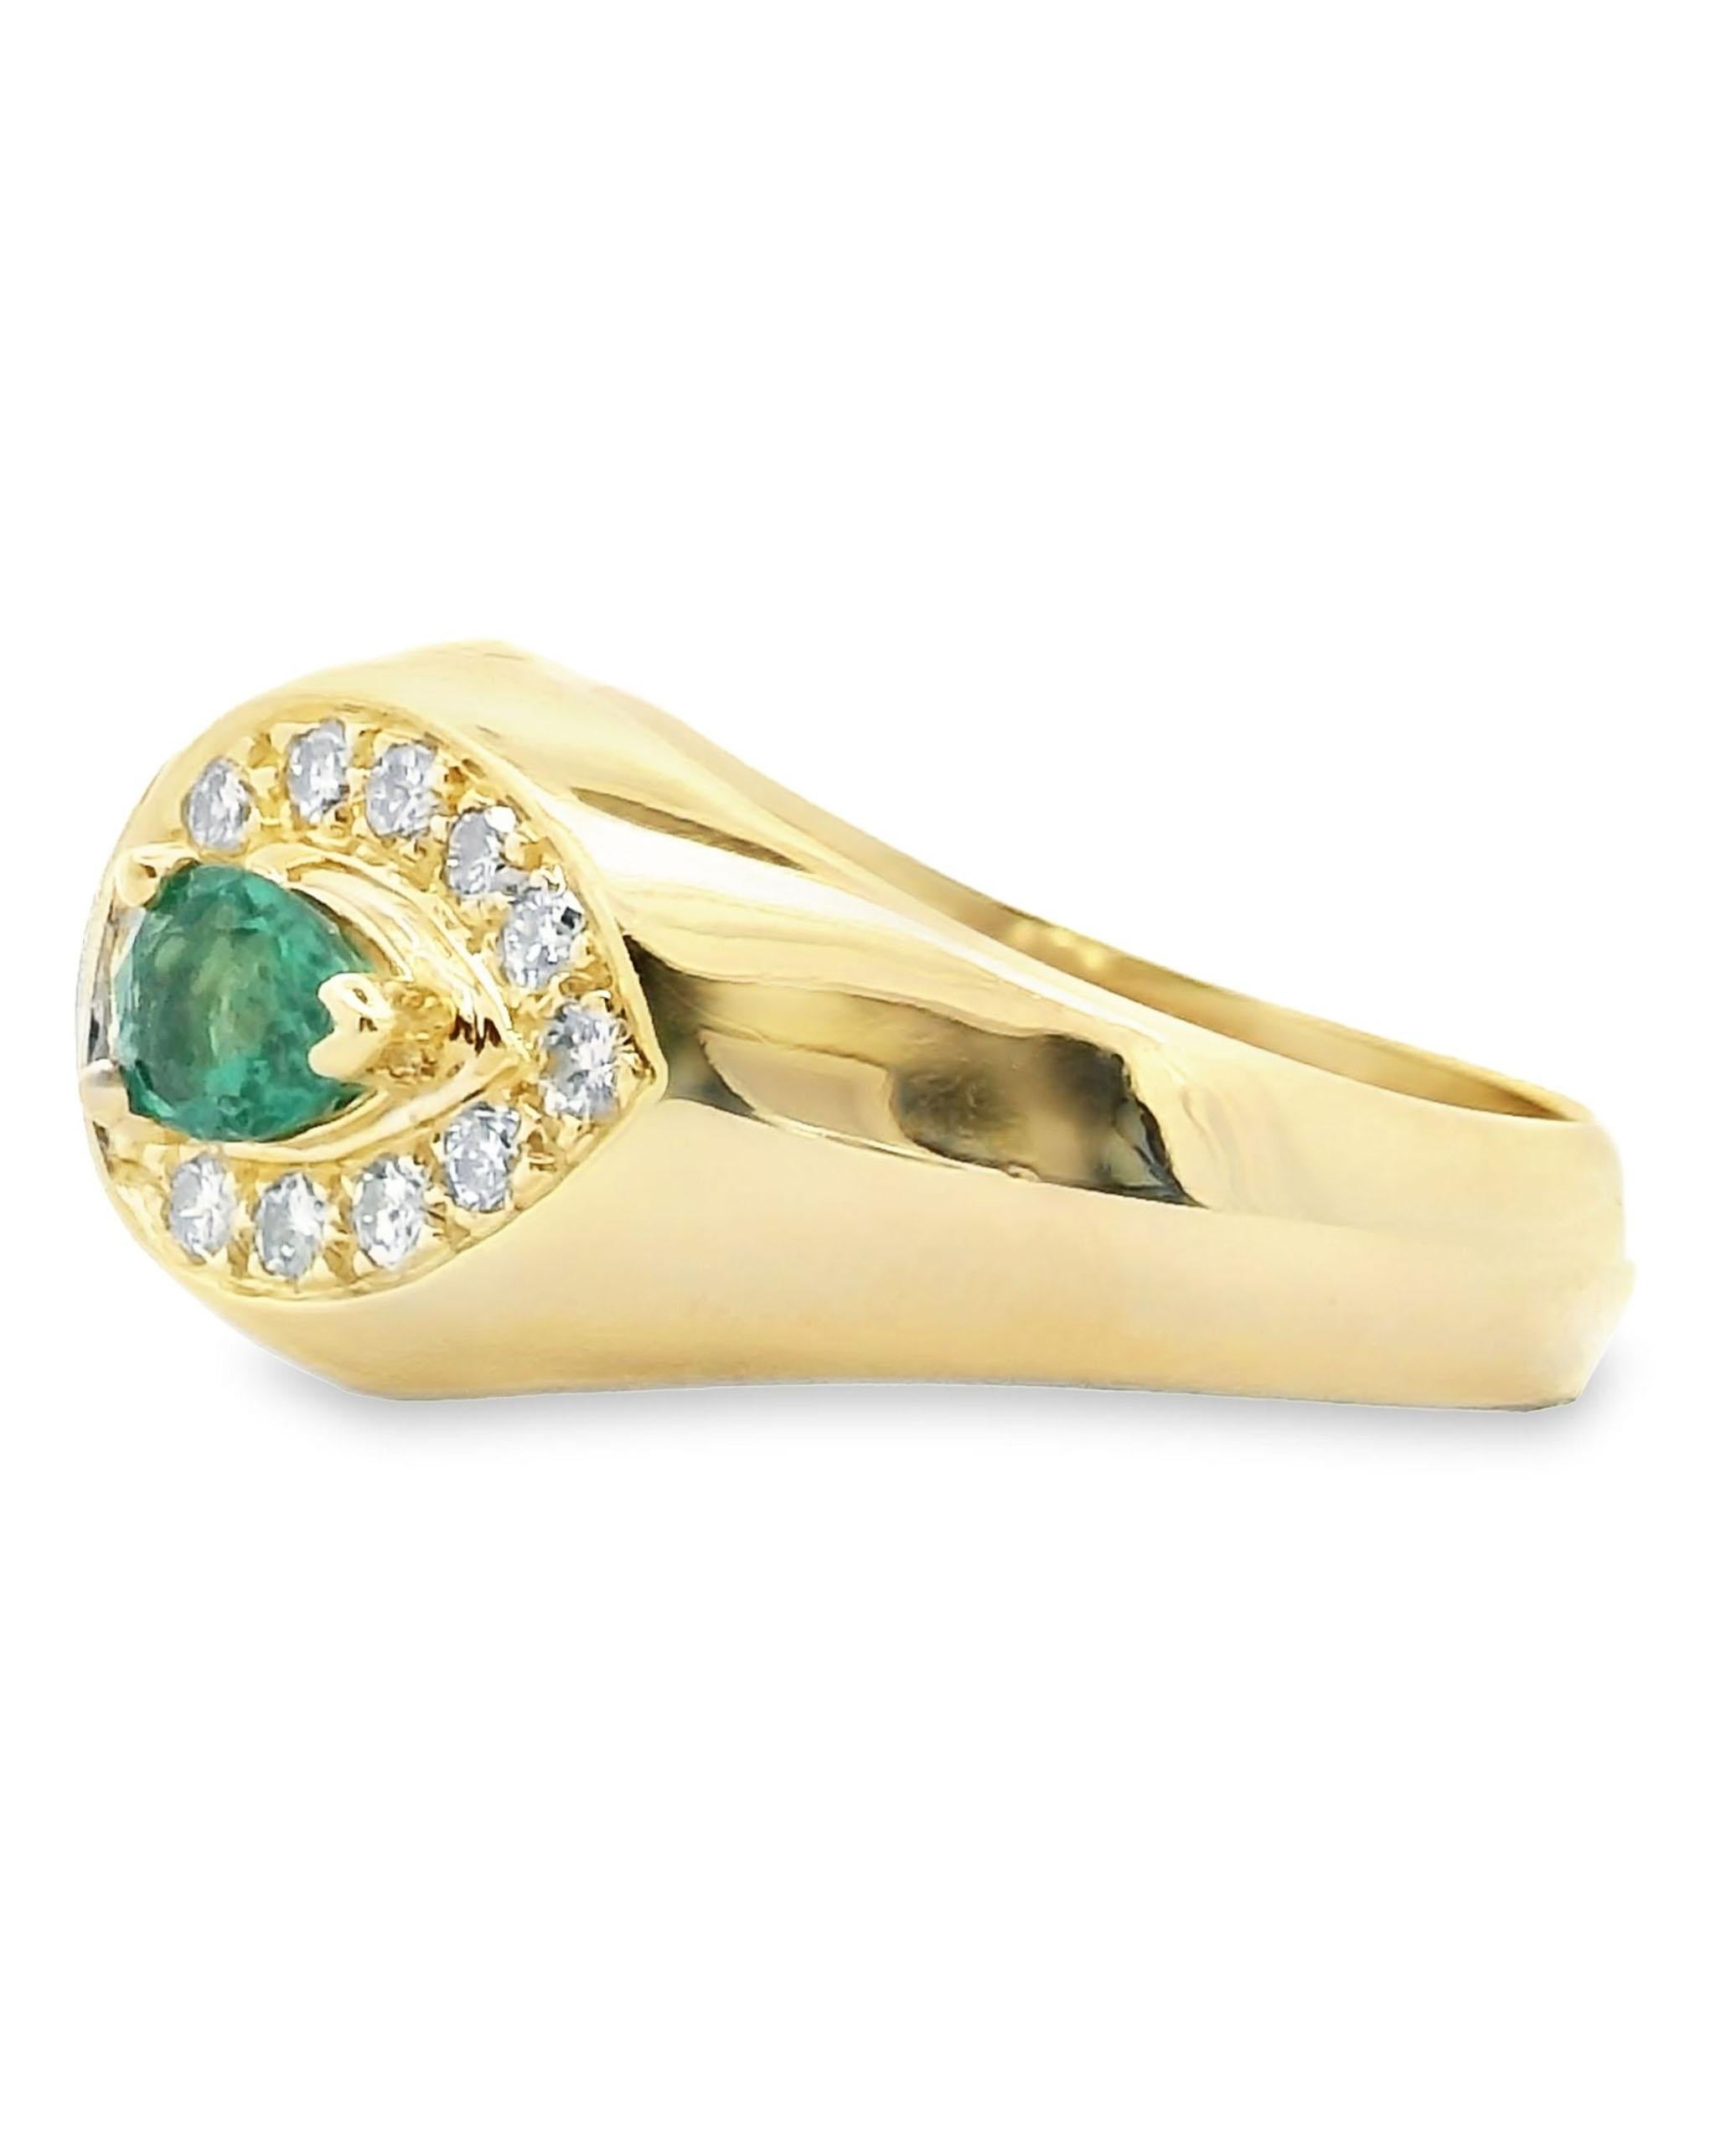 Vintage Emerald Ring with Diamonds Set in 18K Gold - Circa 1985 In New Condition For Sale In Old Tappan, NJ